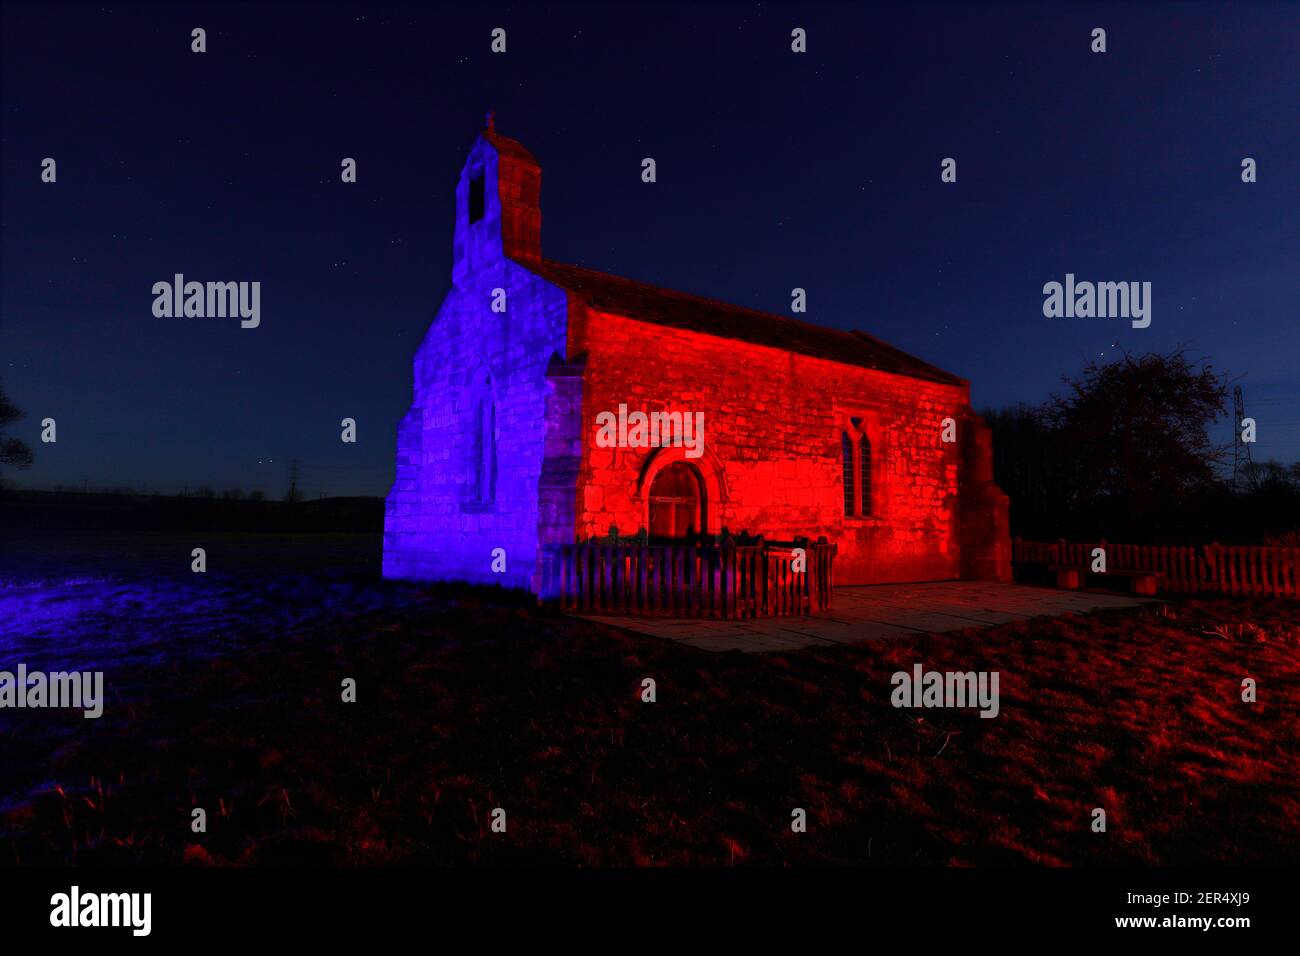 St Mary's Chapel, also known as St Mary's Church at Lead near Tadcaster. The church has been illuminated using a rgb led light Stock Photo